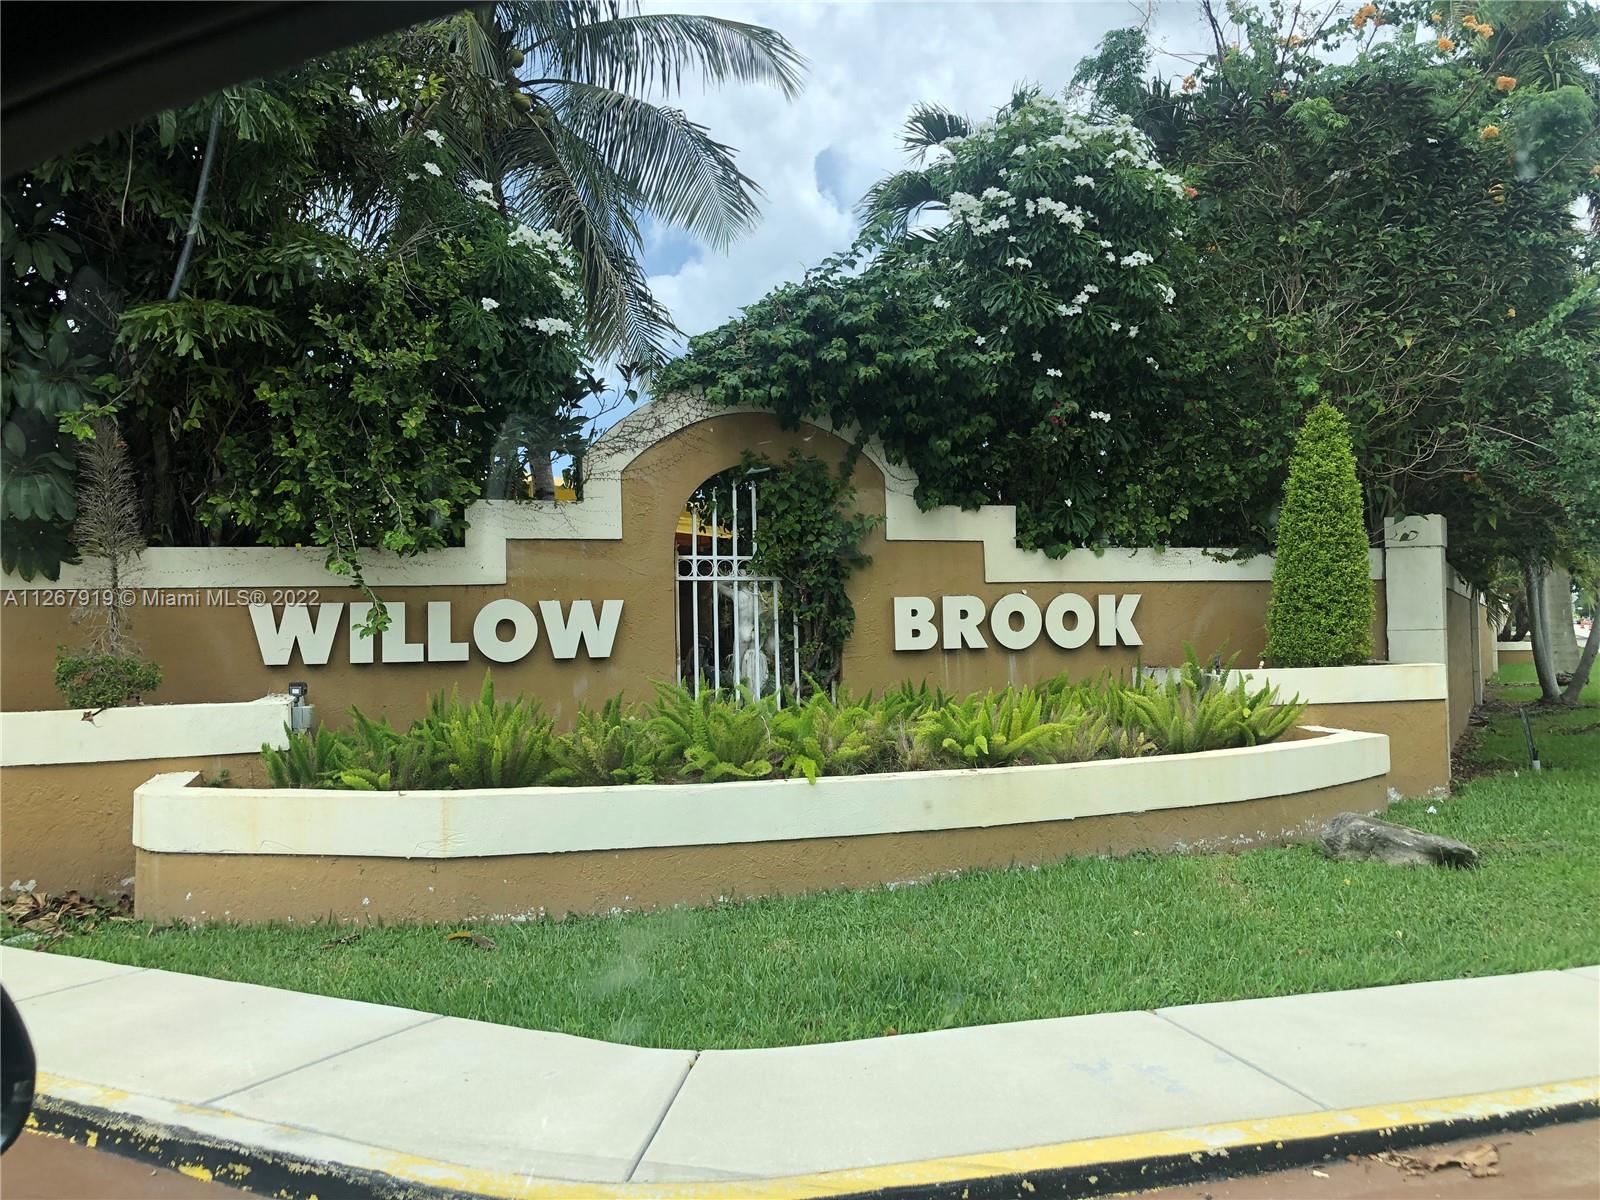 Wonderful community of Willow Brook in West Kendall